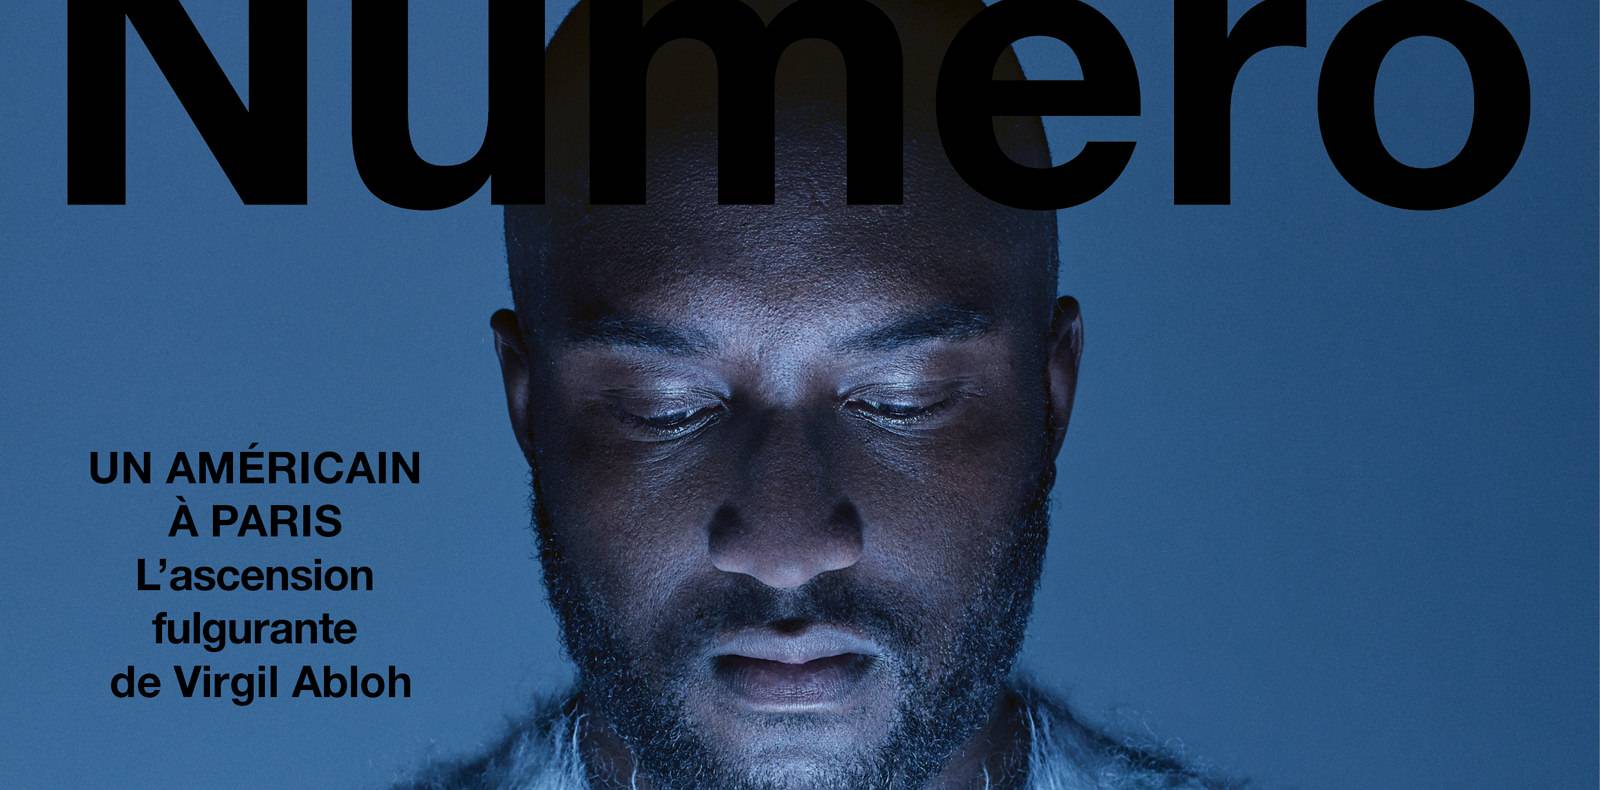 Exclusive: designer Virgil Abloh by Jean-Baptiste Mondino on the cover of the new Numéro Homme